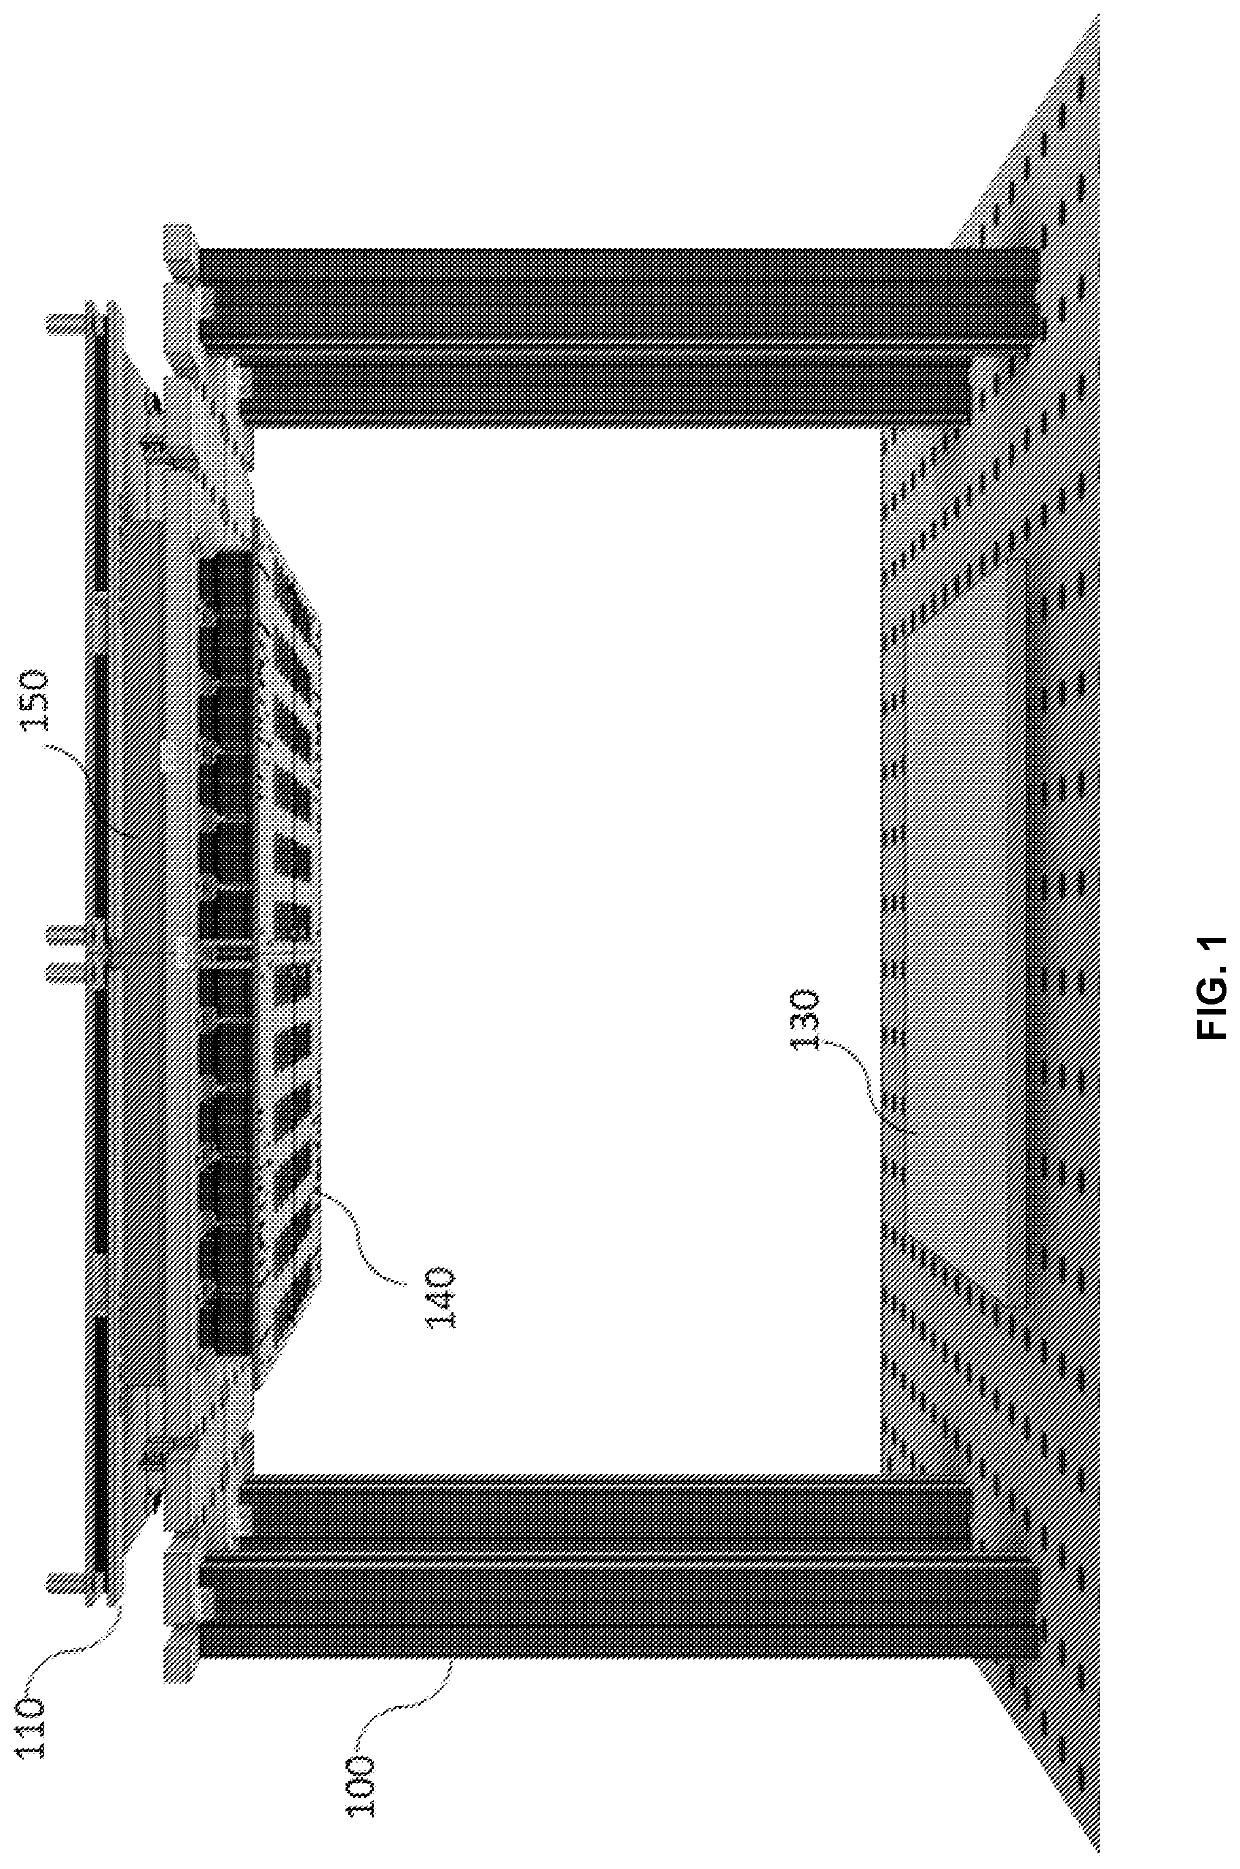 Unscanned optical inspection system using a micro camera array